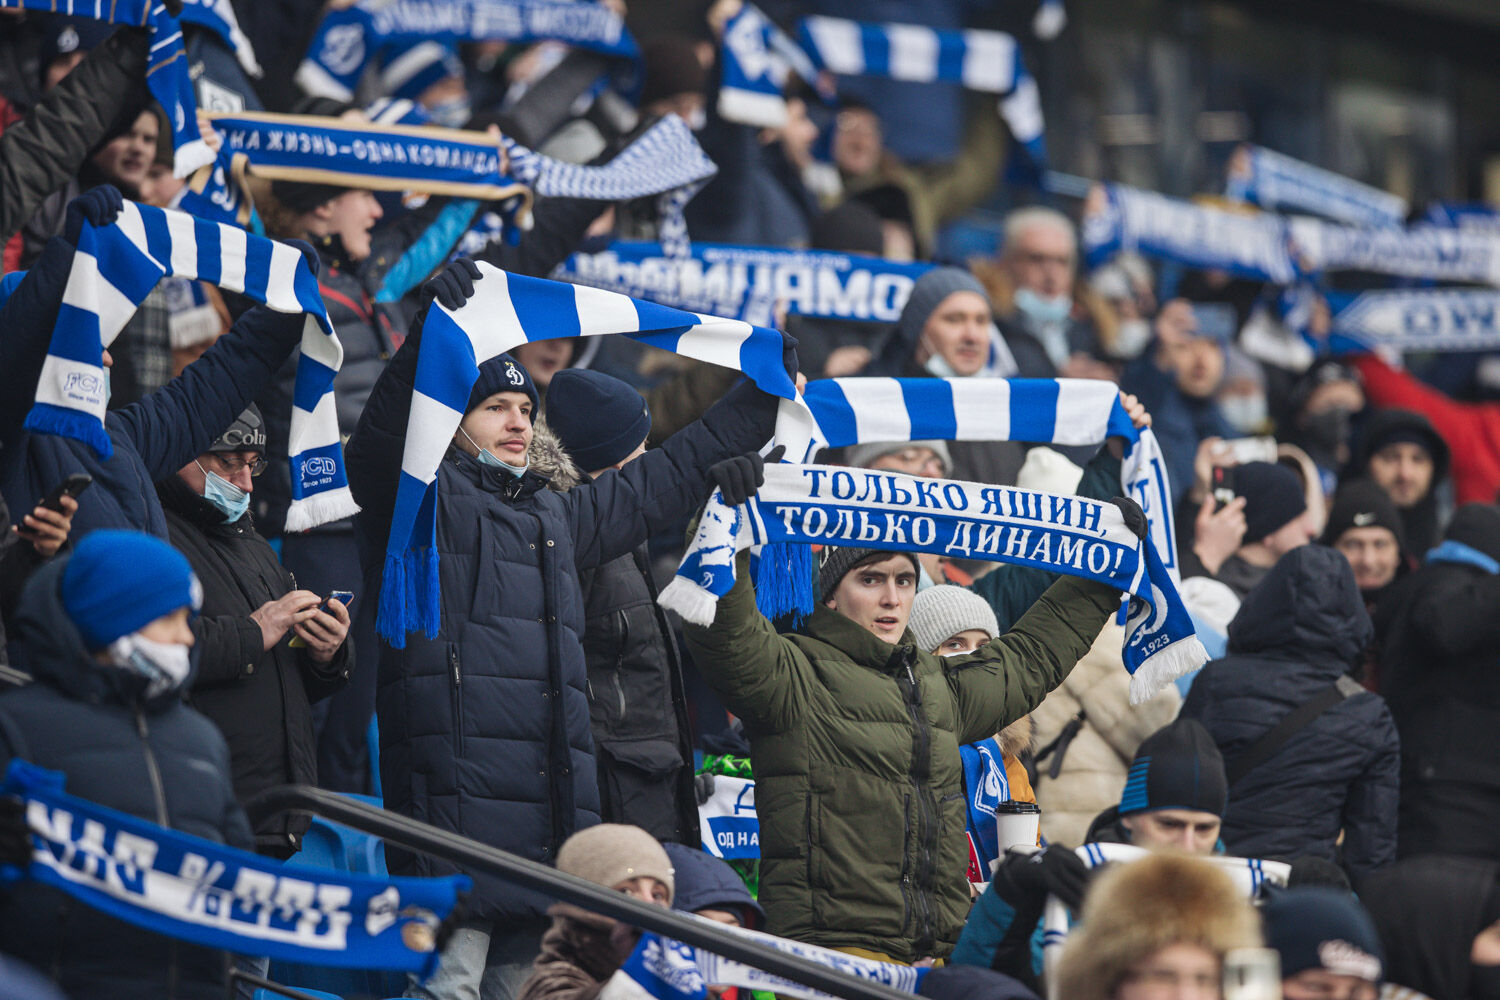 Photo gallery from the match against Zenit